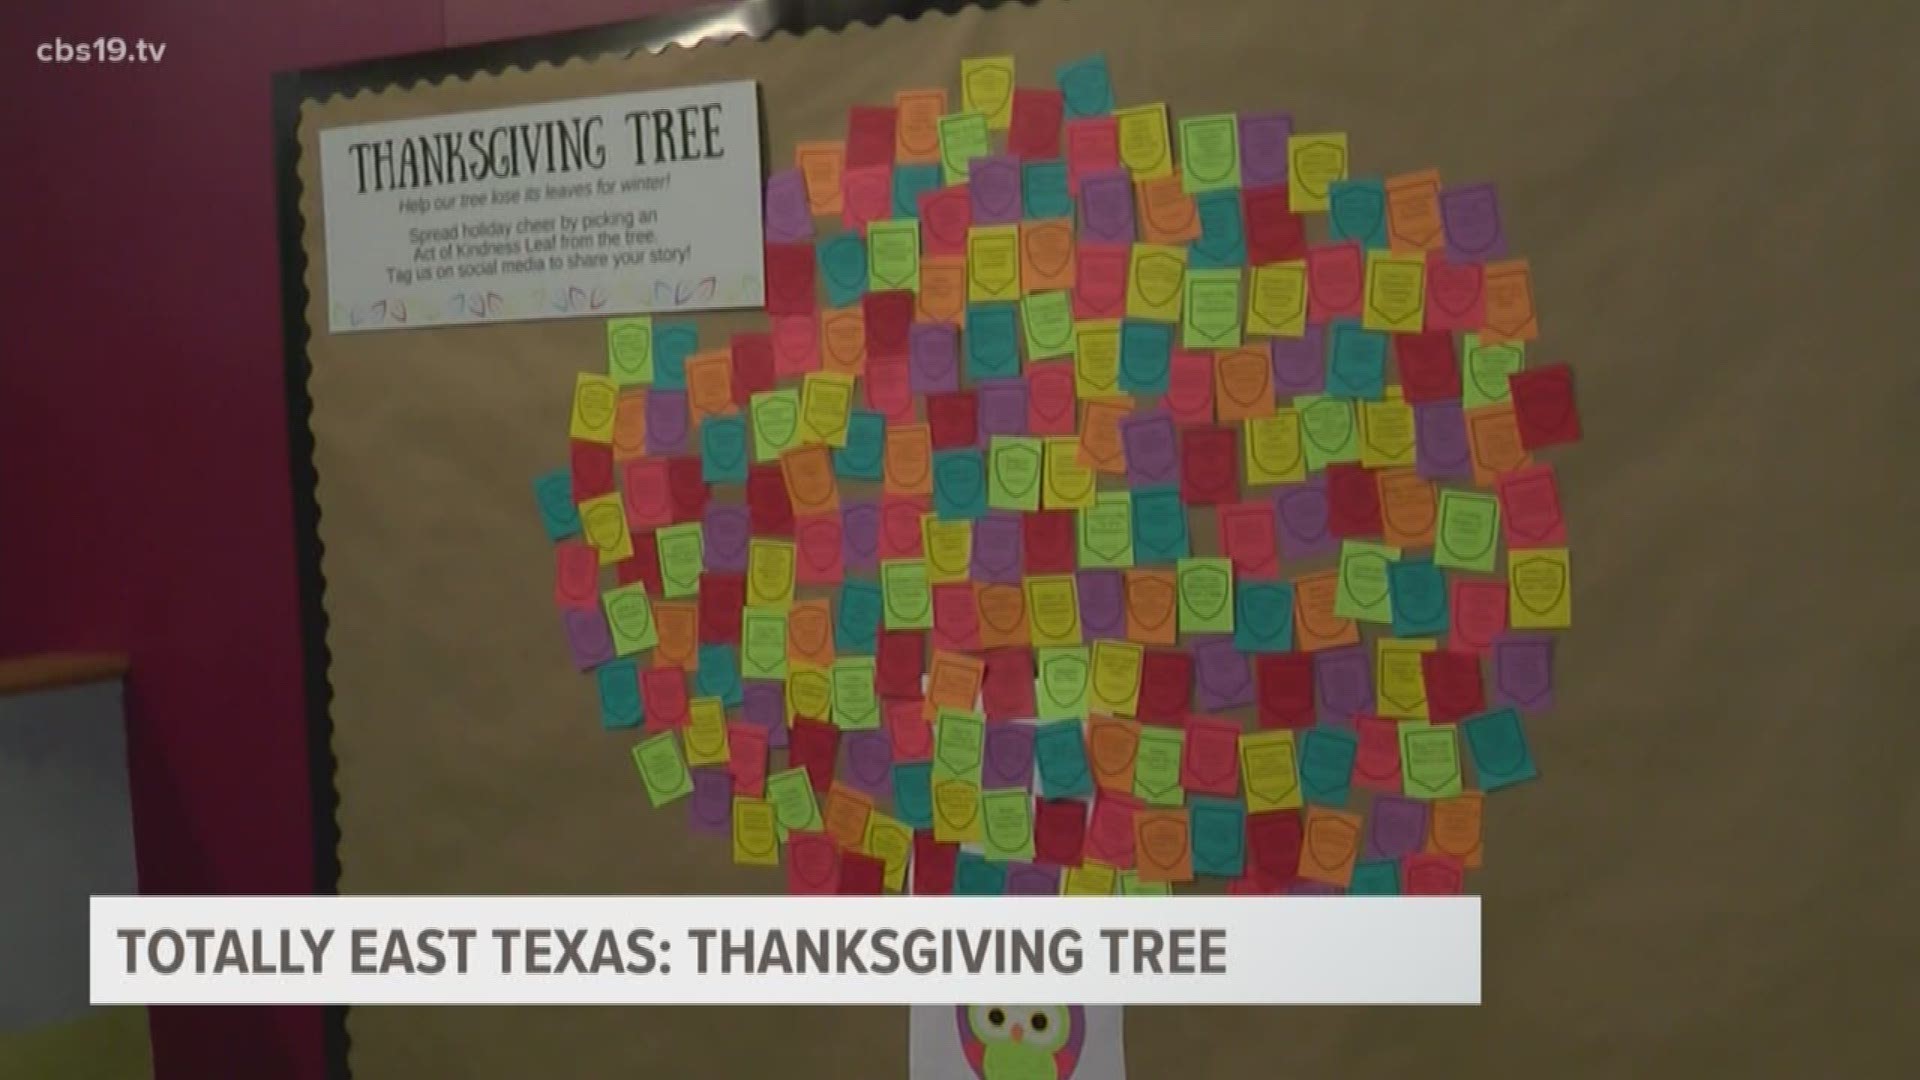 Nestled inside the Texas Forestry Museum in Lufkin is the Thanksgiving Tree in November. It's brightly colored leaves filled with inspiration for acts of kindness.